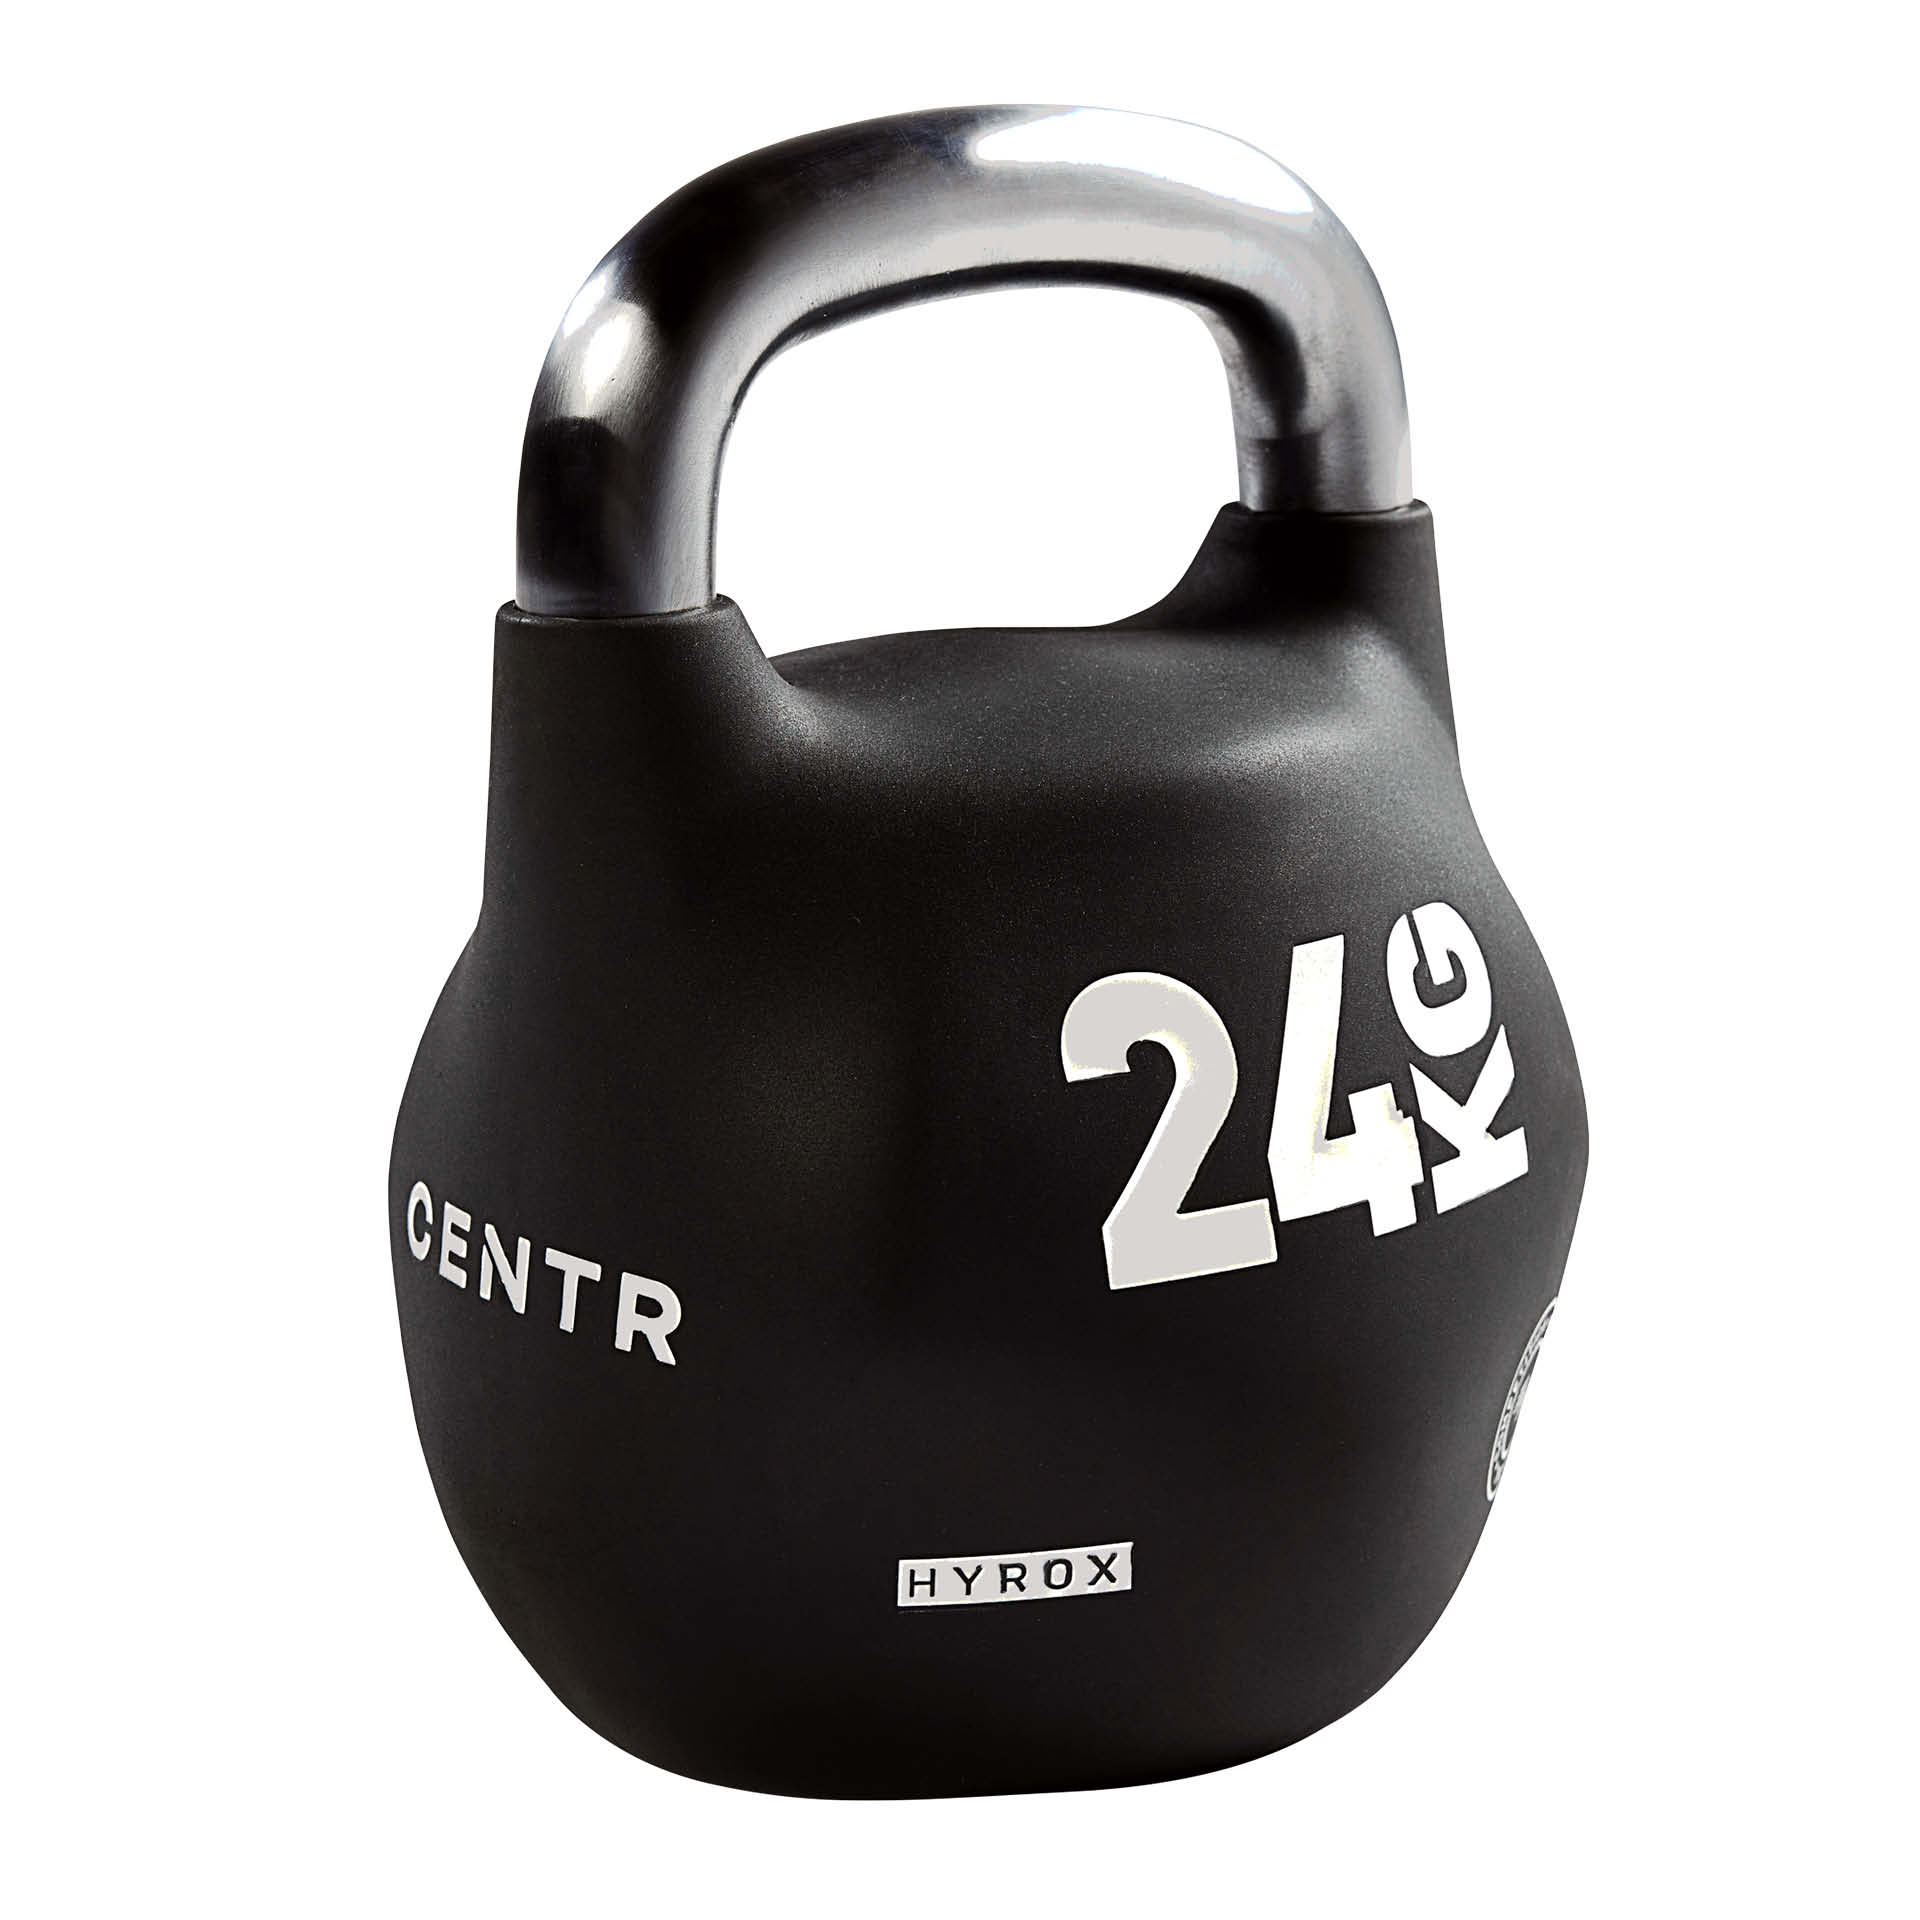 CENTR x HYROX Competition Octo Kettlebell 24 kg